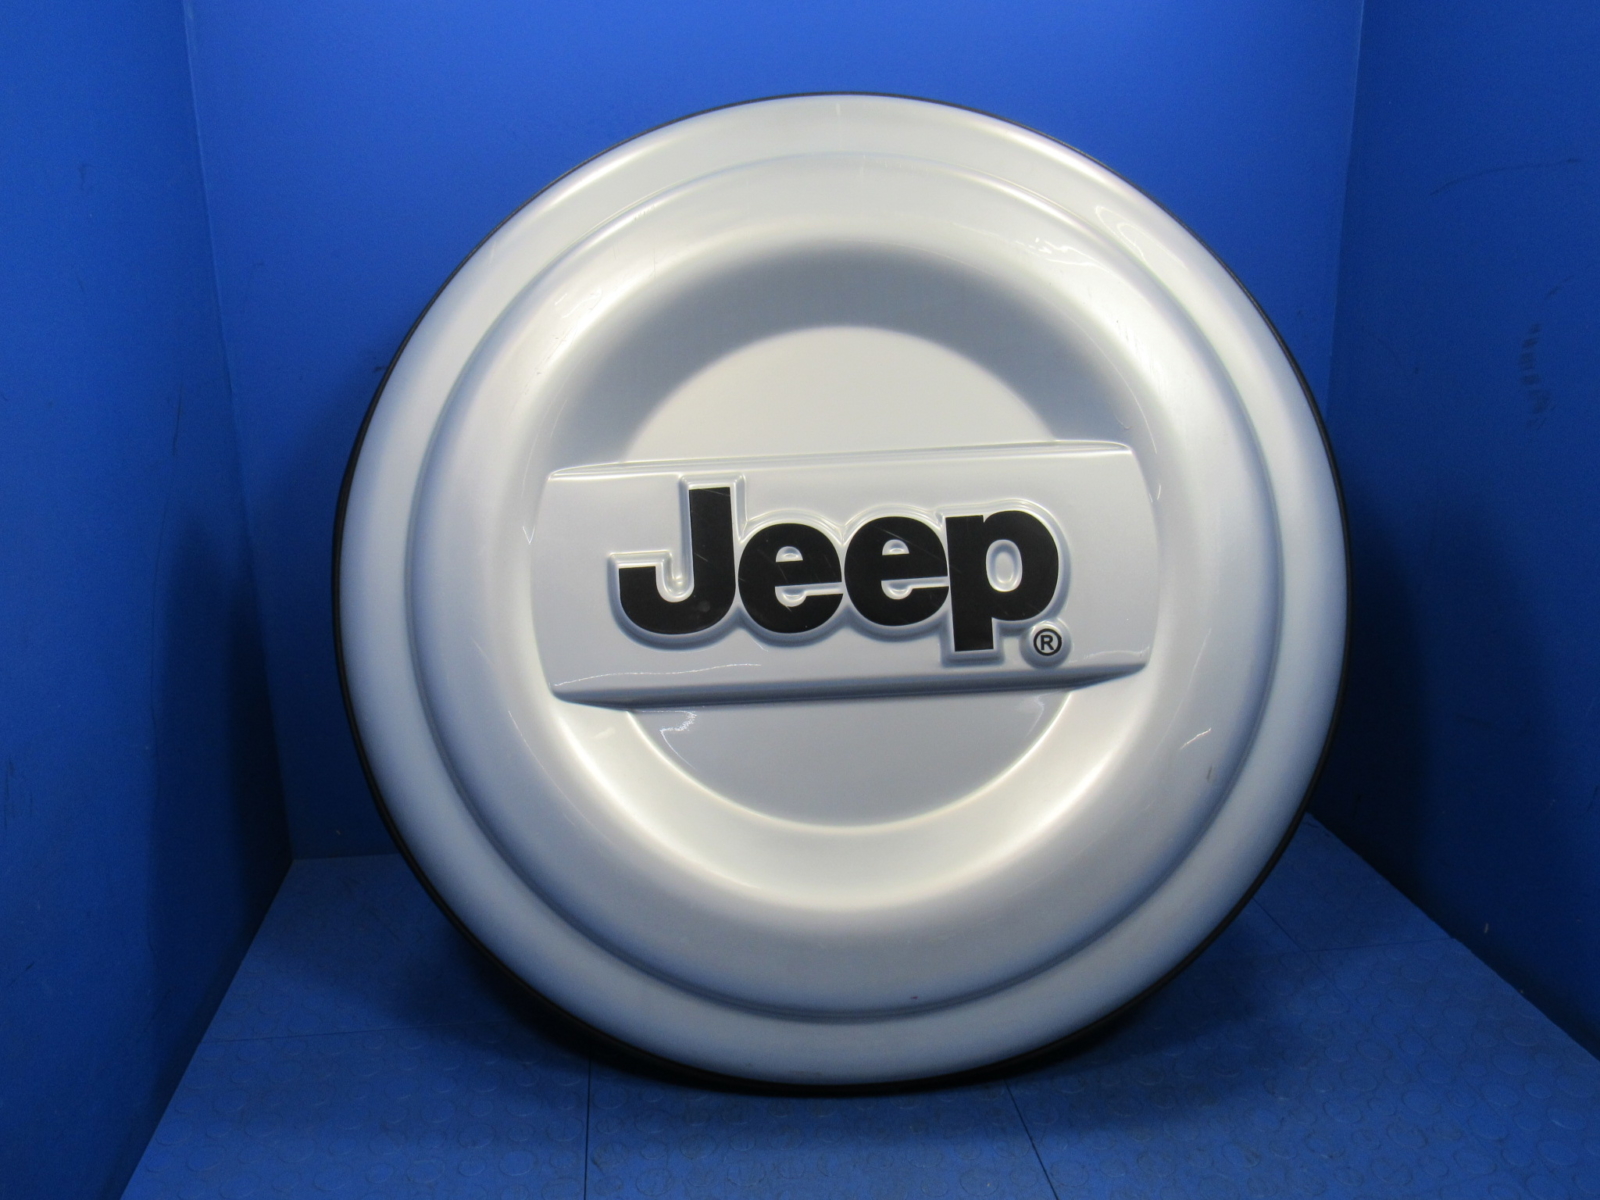 99-13 Jeep Liberty Wrangler Hard Shell Rear Spare Tire Cover OEM Silver  9062 – Importapart